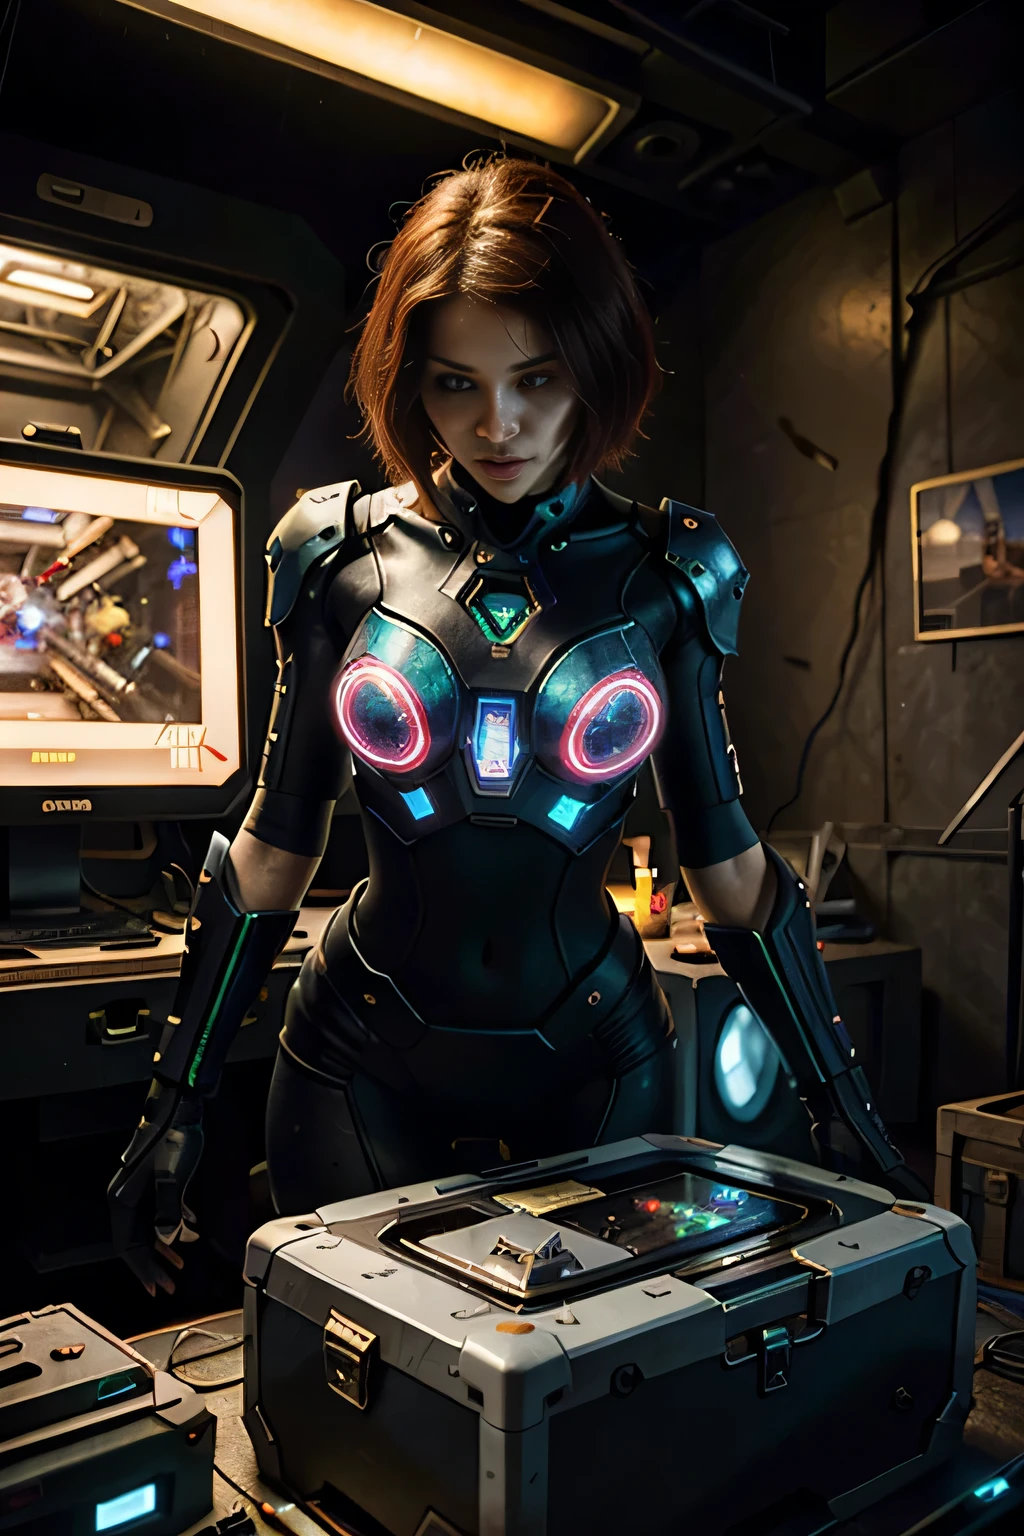 (best quality,4k,8k,highres,masterpiece:1.37), ultra-detailed, (realistic,photorealistic,photo-realistic:1.37), (aerial view), (top down perspective), 1woman, (the focal point is a woman pulling a video game cartridge out of a futuristic artifact chest full of retro video game cartridges:1.6), (the woman is looking at the box:1.4), (Futuristic artifact box), (the artifact box is open), (The scene unfolds inside a mystical cavern:1.4), joints, mecha, (The woman is wearing an insectoid exoskeleton made with glass details, covering her entire body:1.5), (dynamic angle:1.37), reelmech, mechanical parts, (The woman's hair is made of fractal technologic components:1.5), (She has short red hair:1.37), pixel art, (fantasy and sci-fi mixed:1.5), holographic glitch effects floats around the woman, vibrant colors, (A blue glow emanates from inside the treasure chest), glowing lights, (abandoned machinery), (there are old video game cartridges and consoles on the background), mystical creatures, pixelated details, (there are crystal formations spreading on the background), (futuristic technology), (ancient artifacts), mystical energy, vibrant retro aesthetic, atmospheric lighting, ancient ruins, mysterious symbols, shimmering water, lush vegetation, interdimensional portals, nostalgic atmosphere, immersive storytelling, epic adventure, delightful surprises